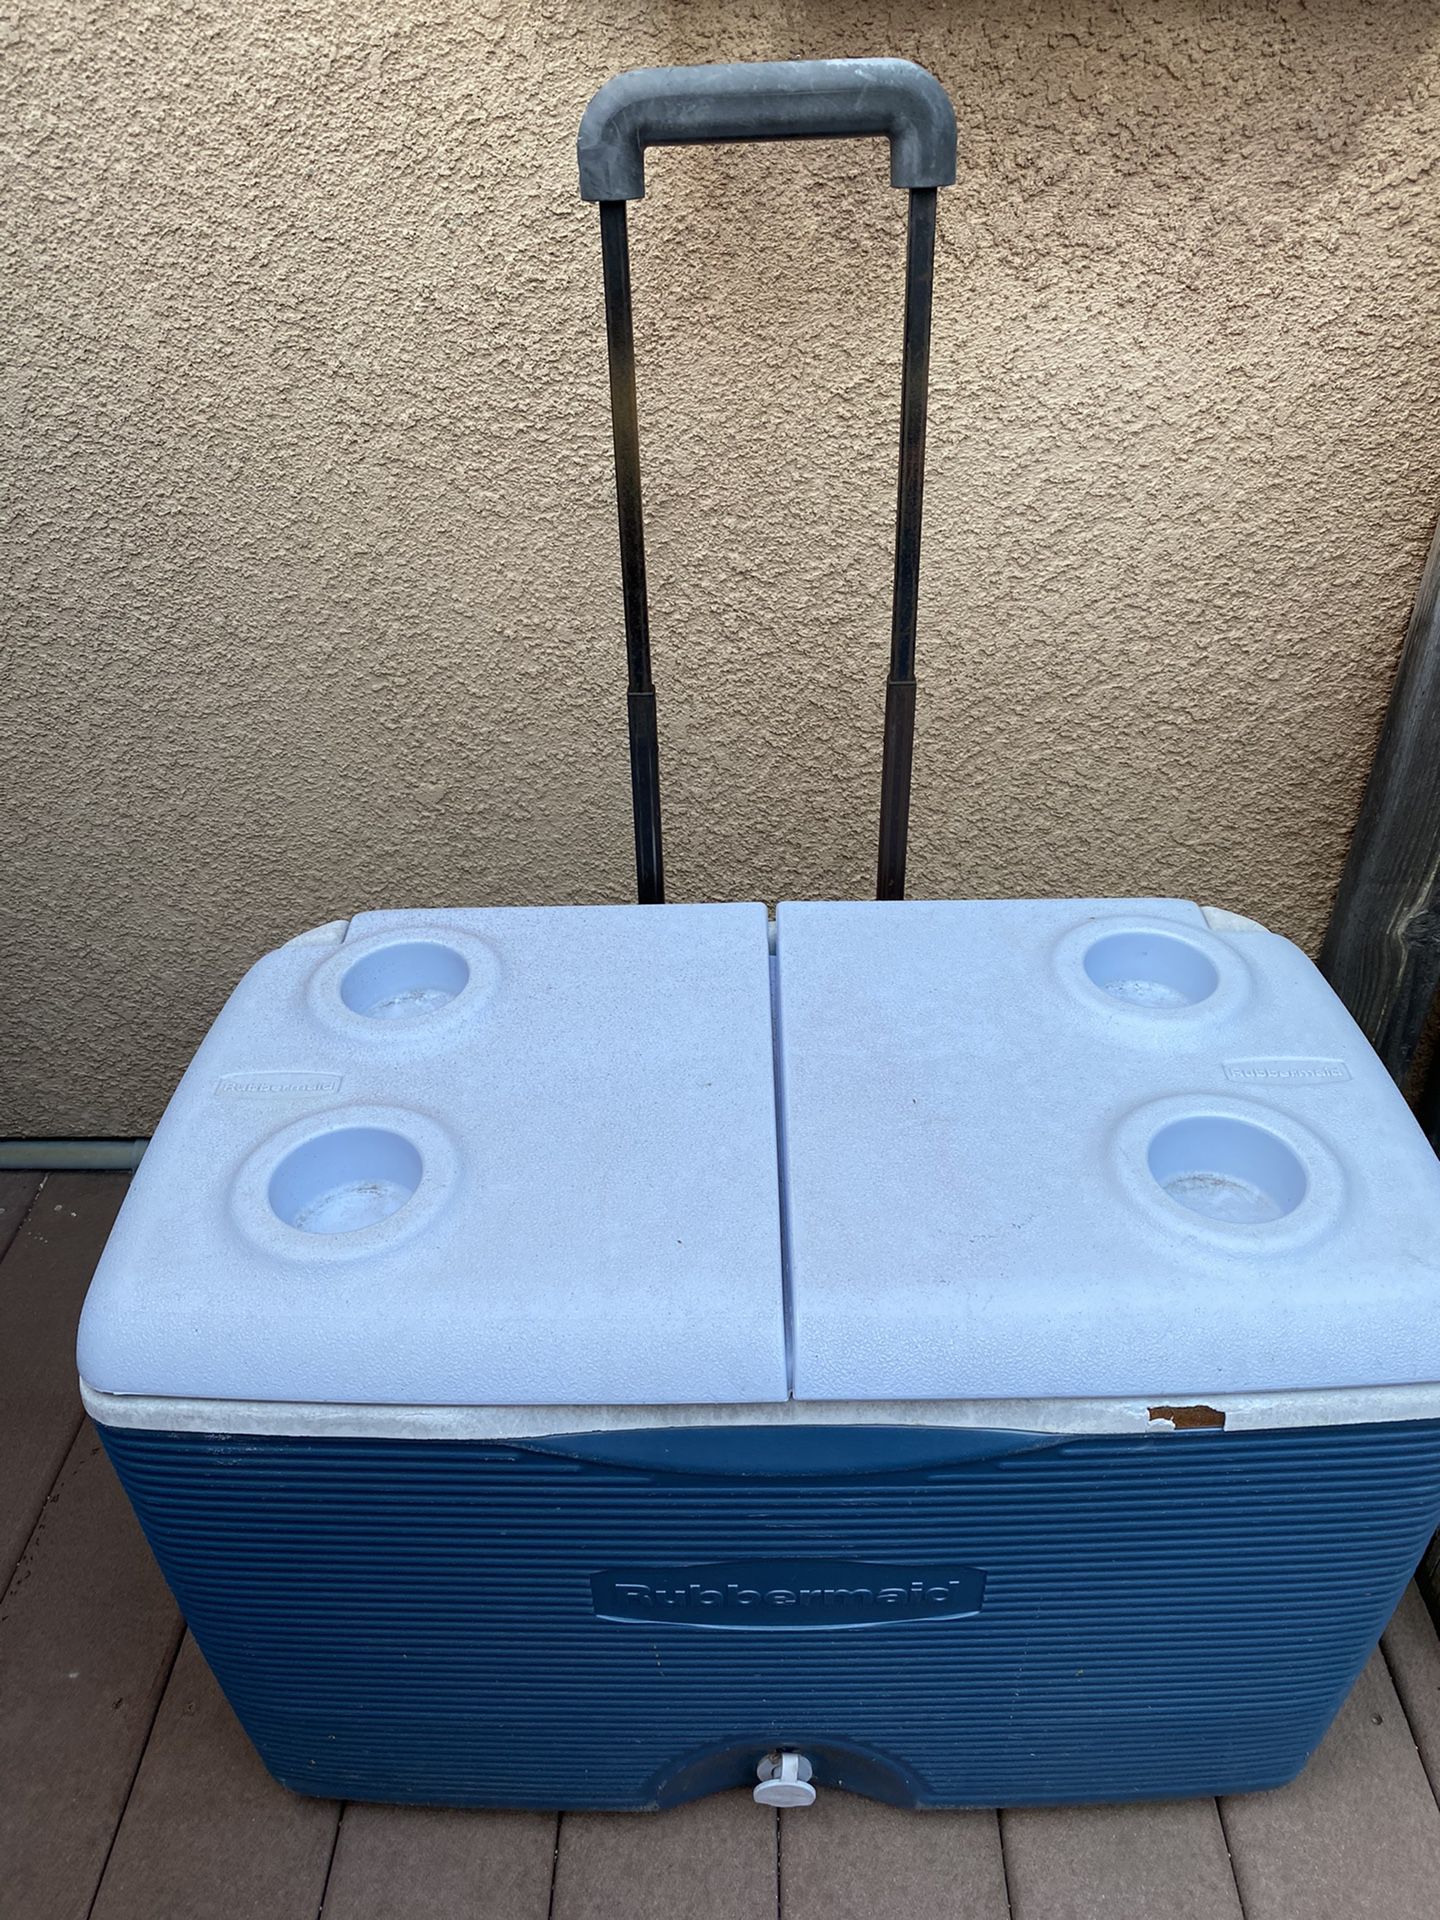 Rubbermaid rolling cooler